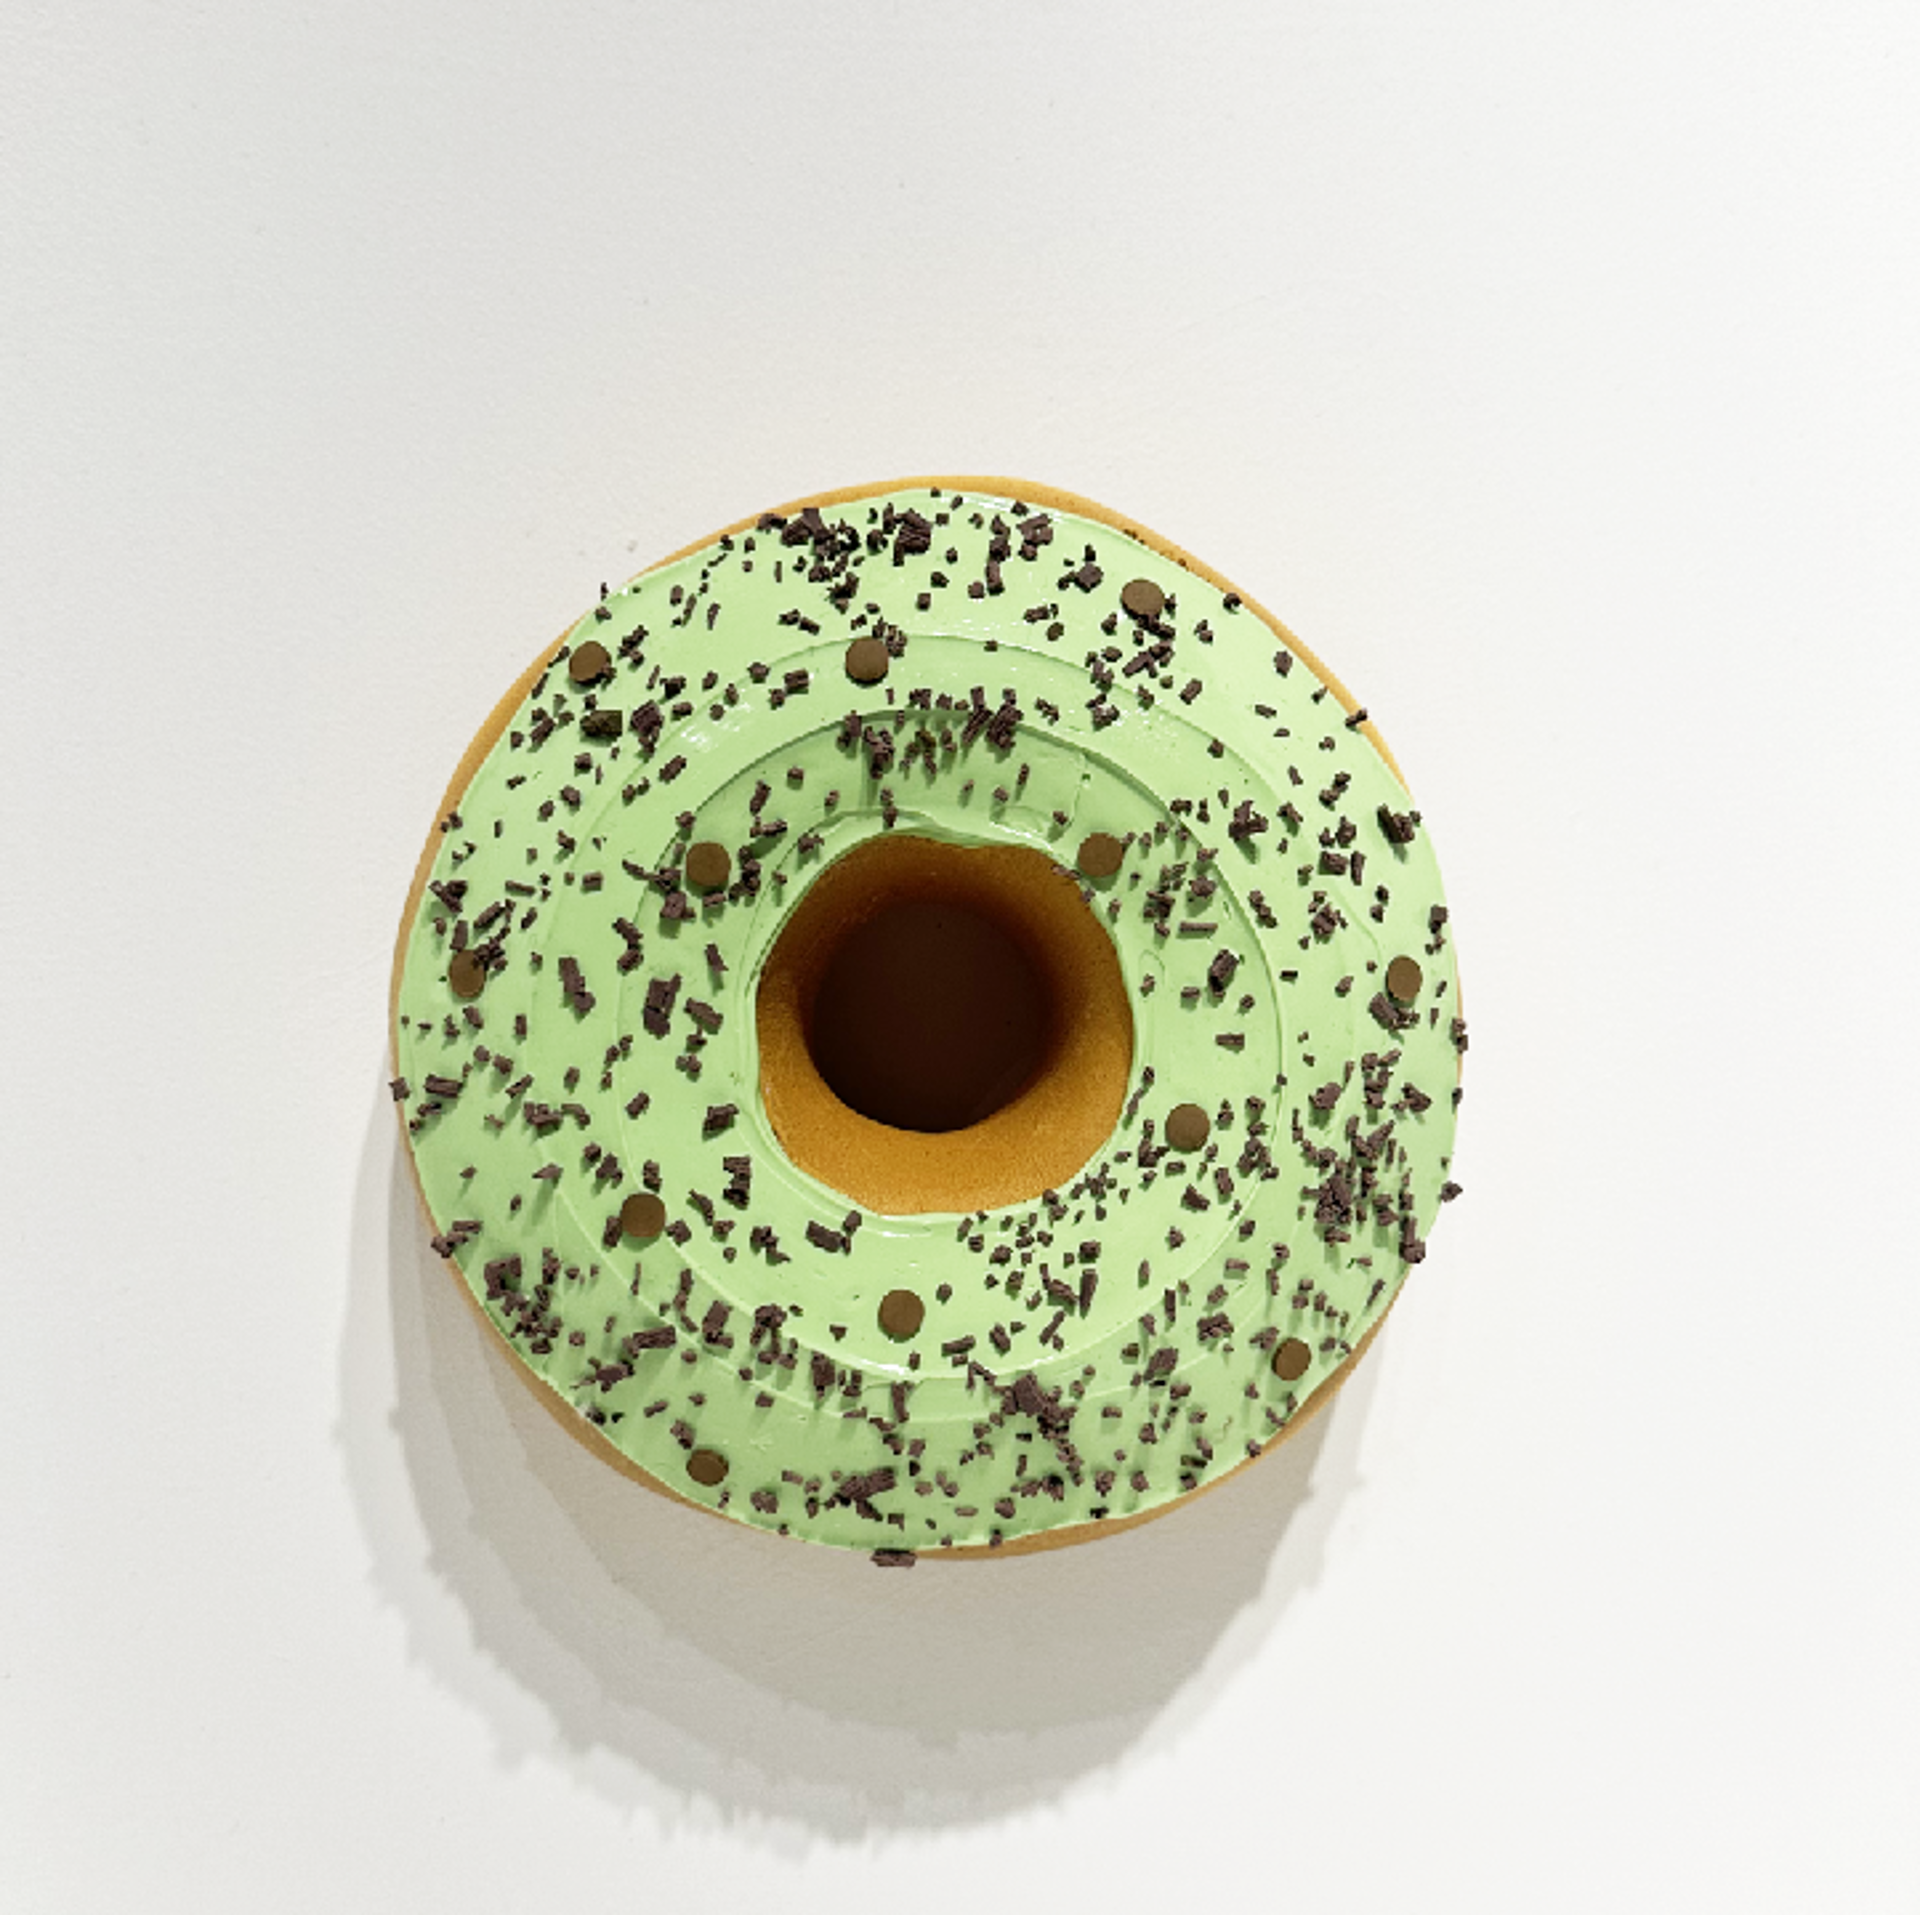 Mint Chocolate Chip Donut by Anna Sweet